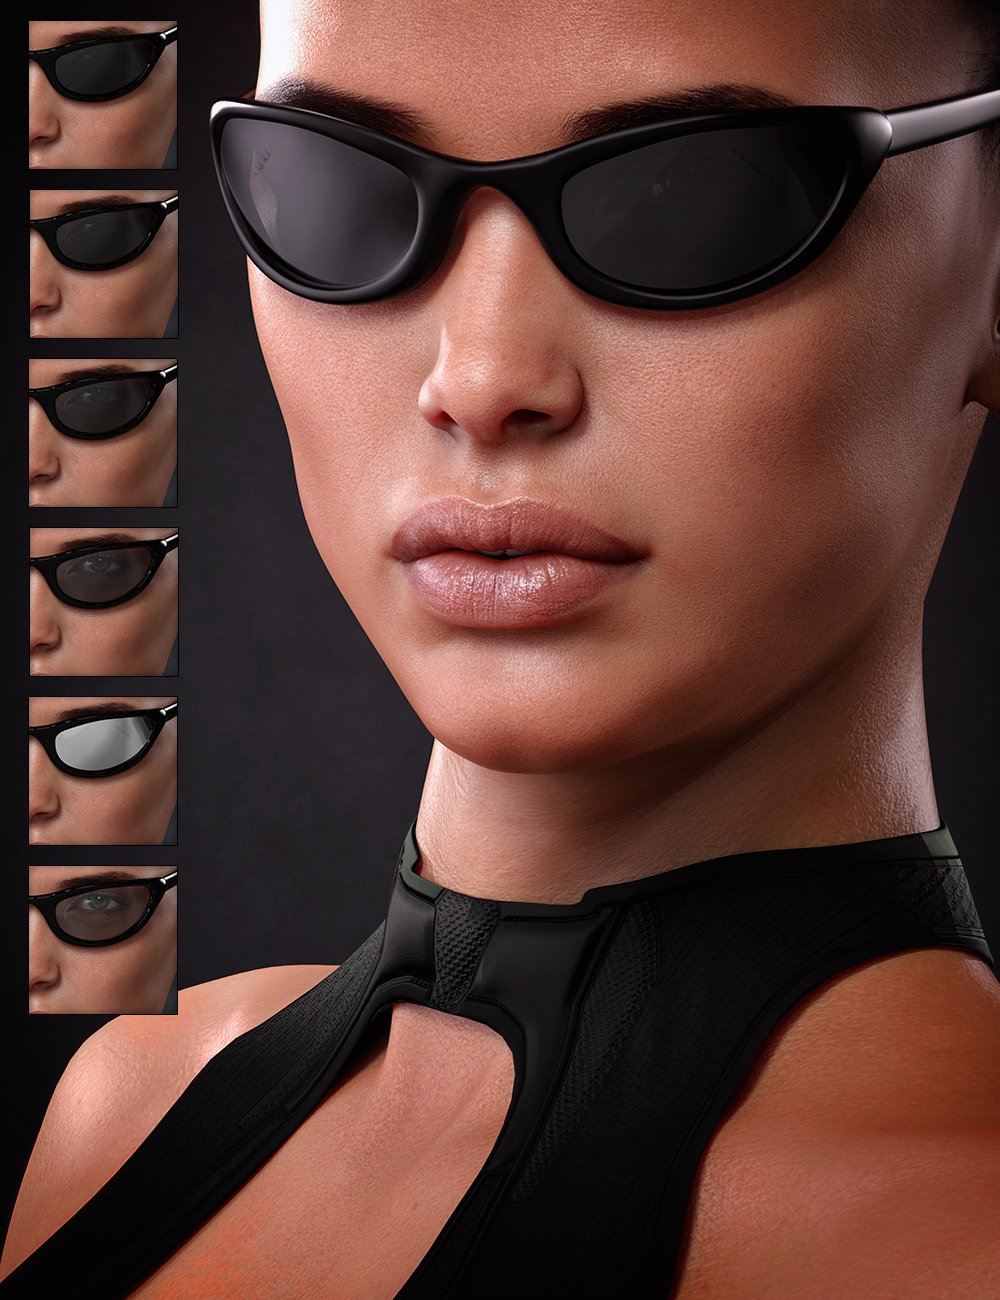 Sunglasses Set 1 for Genesis 8 and 8.1 Males and Females